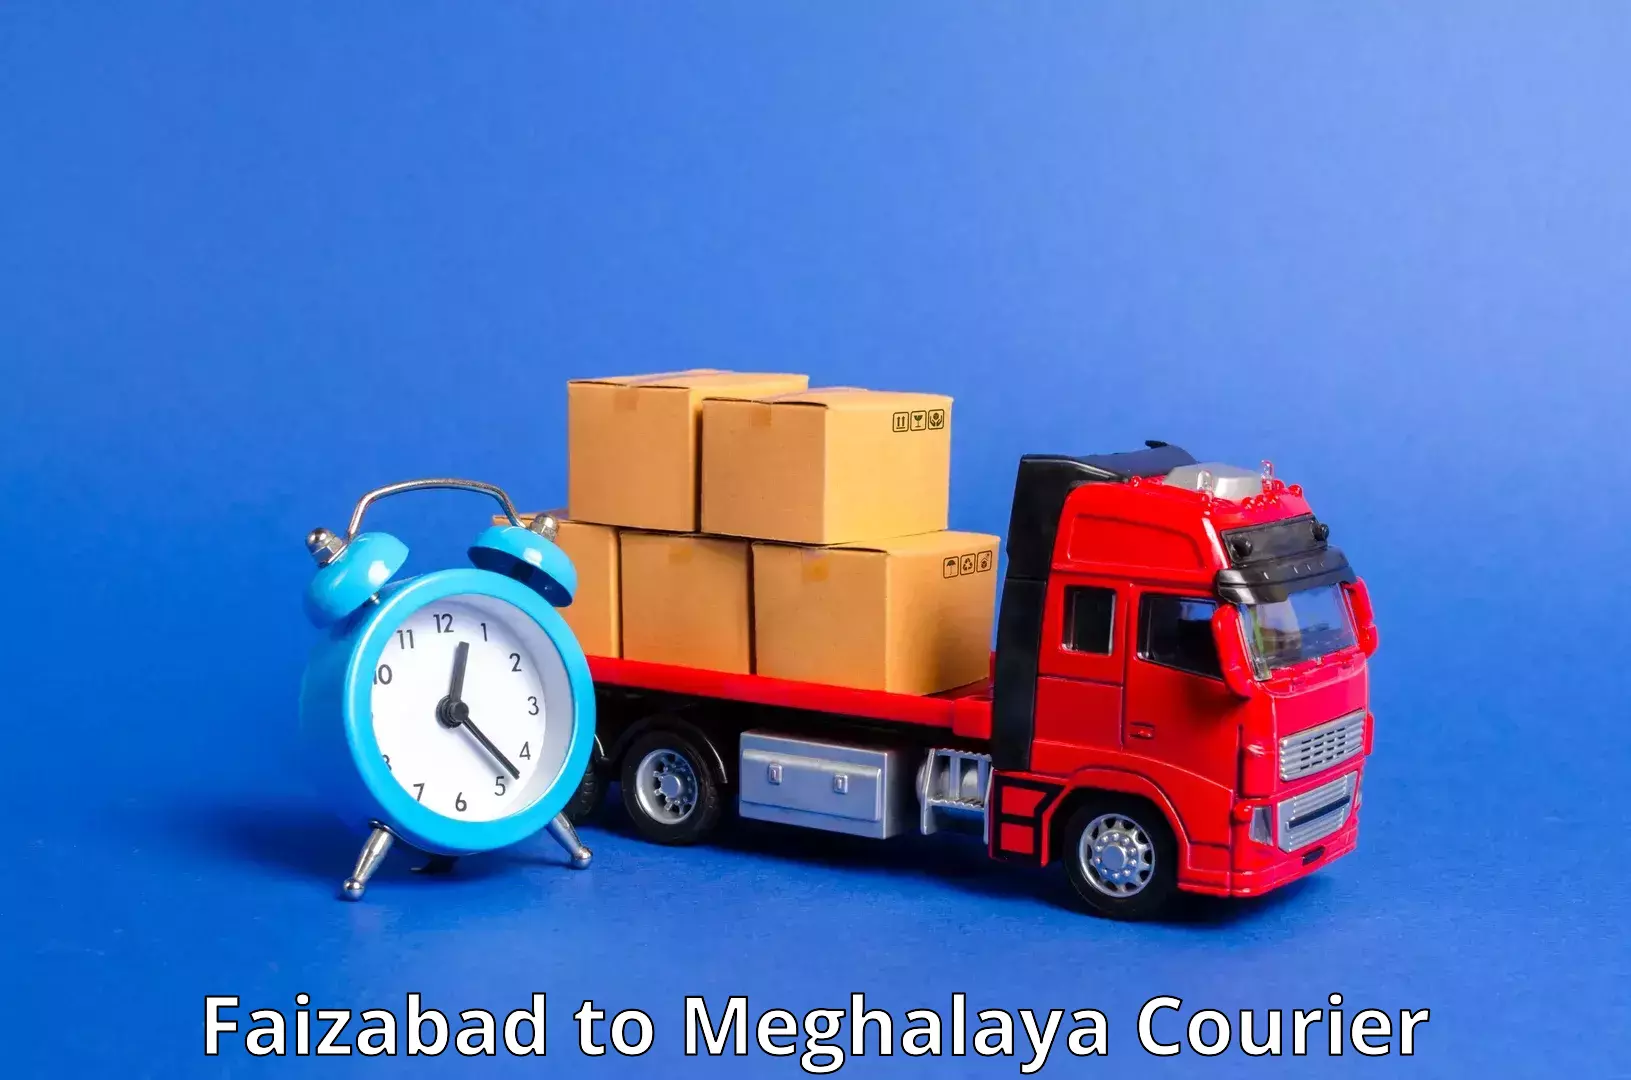 State-of-the-art courier technology Faizabad to Shillong